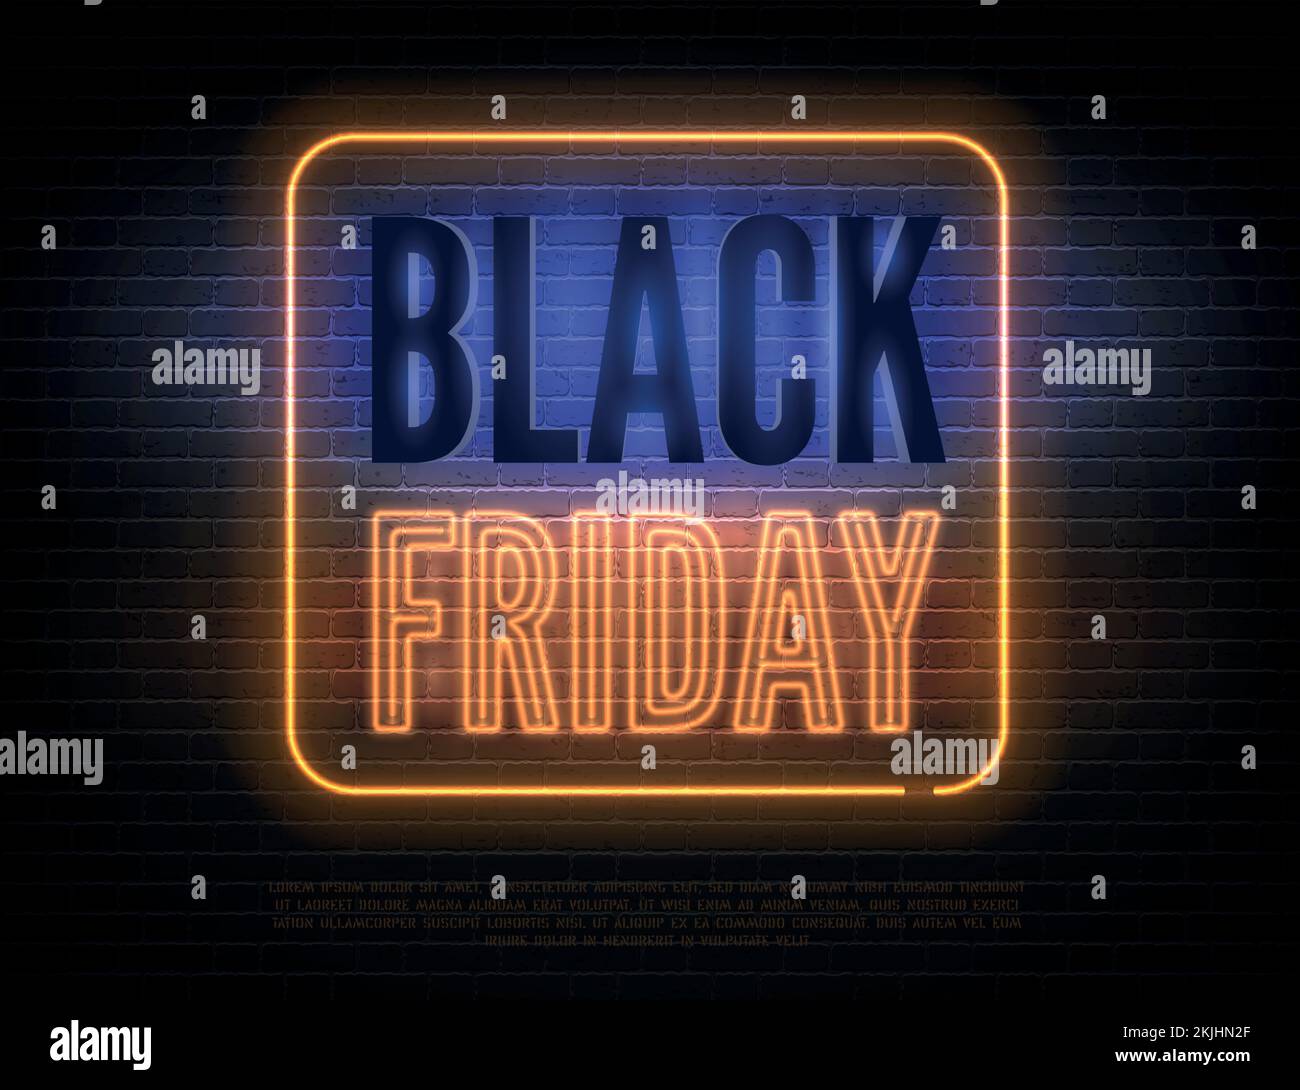 Black Friday Flyer with Neon Lights